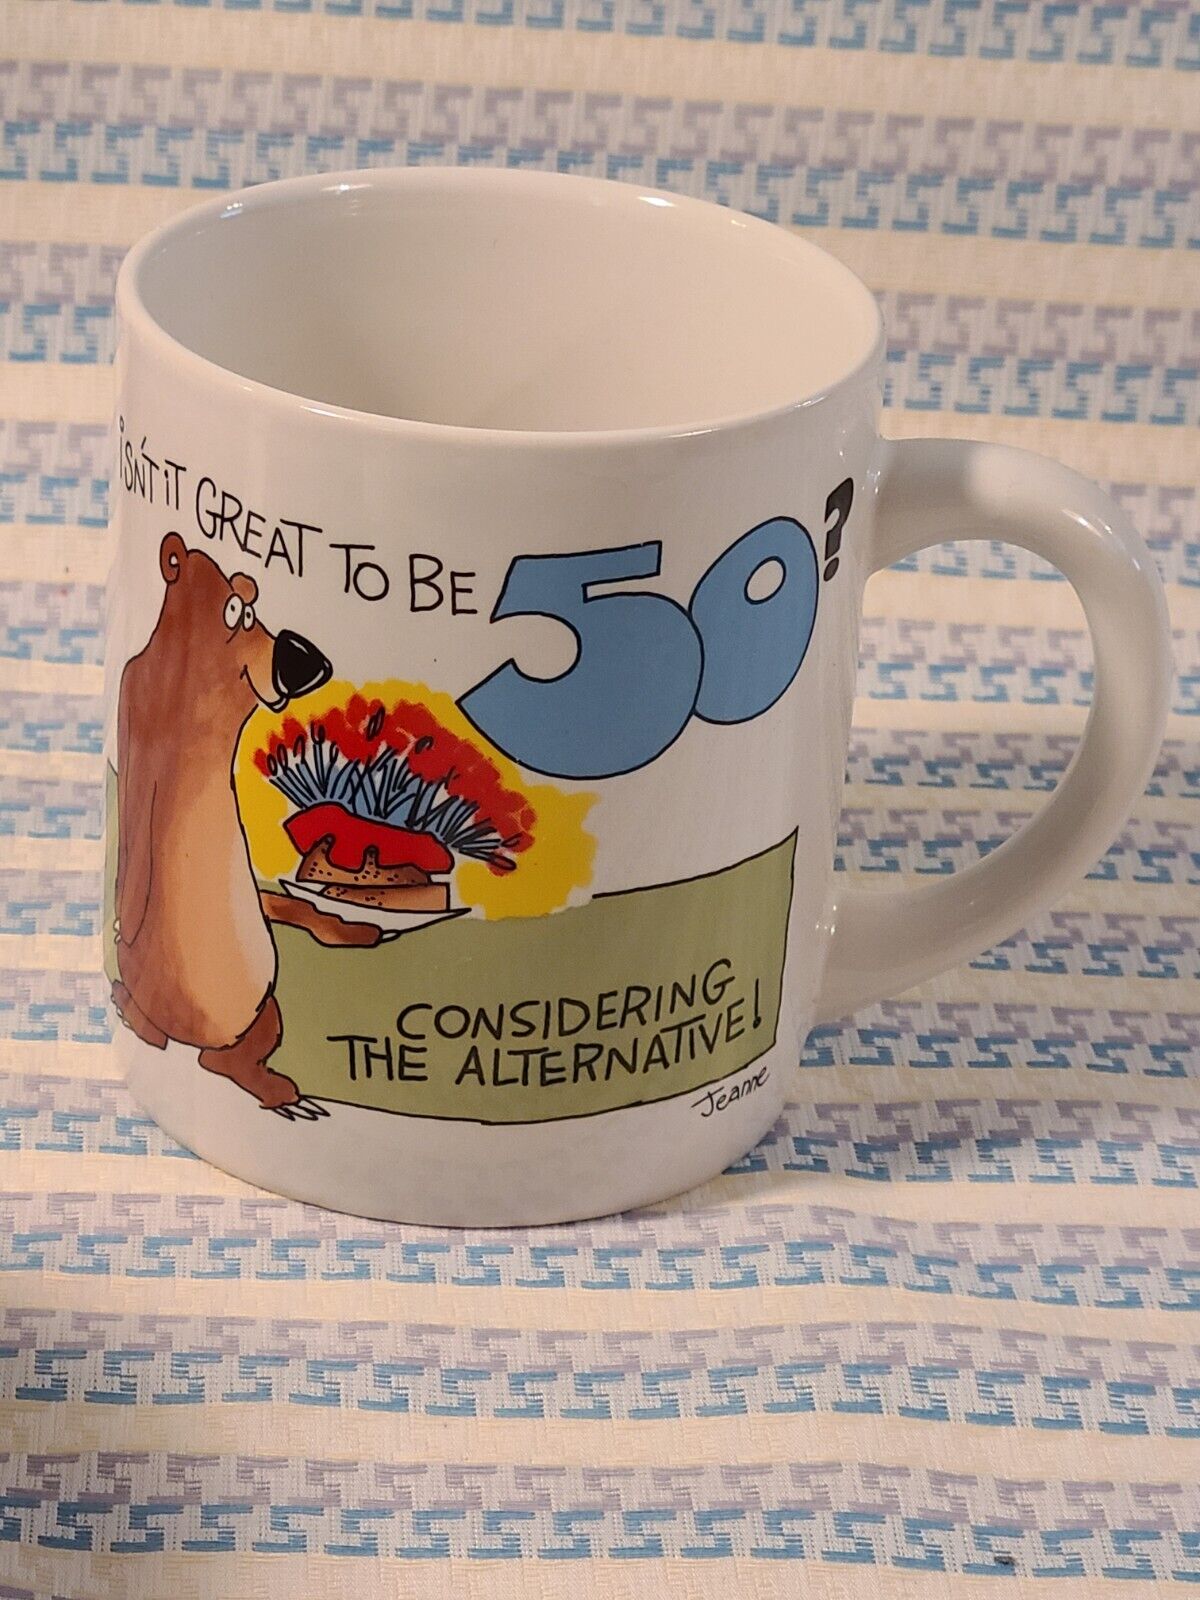 Vintage Funny Birthday Message Mug Great to be 50 Considering the Alternative